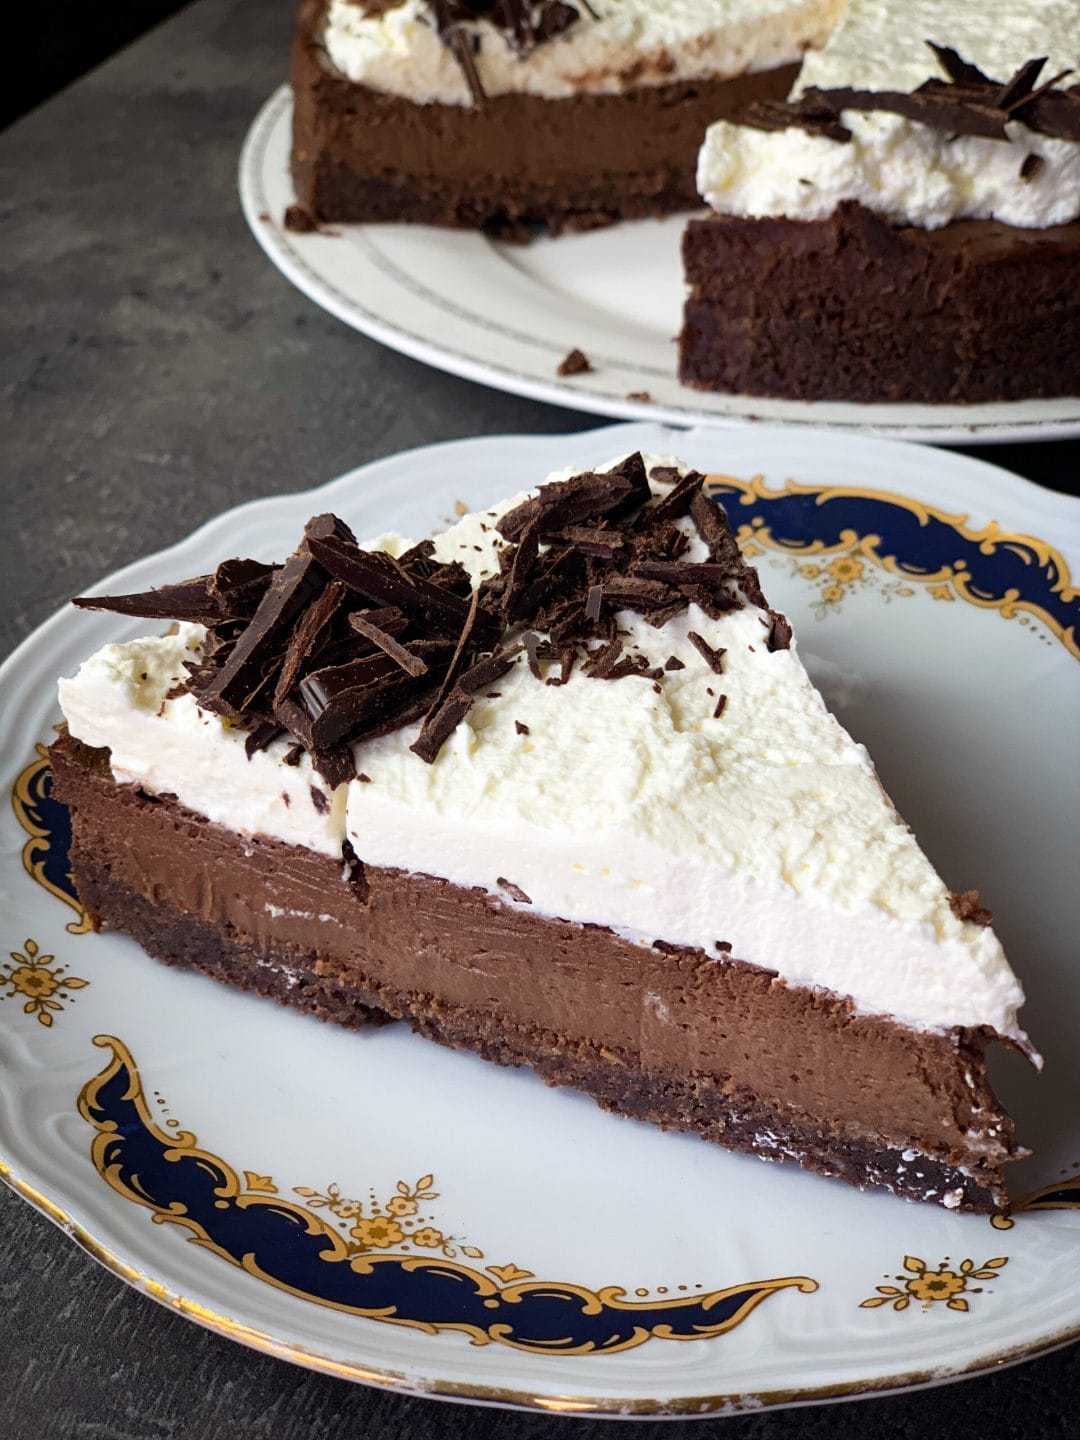 Picture of a keto chocolate cake with cream topping